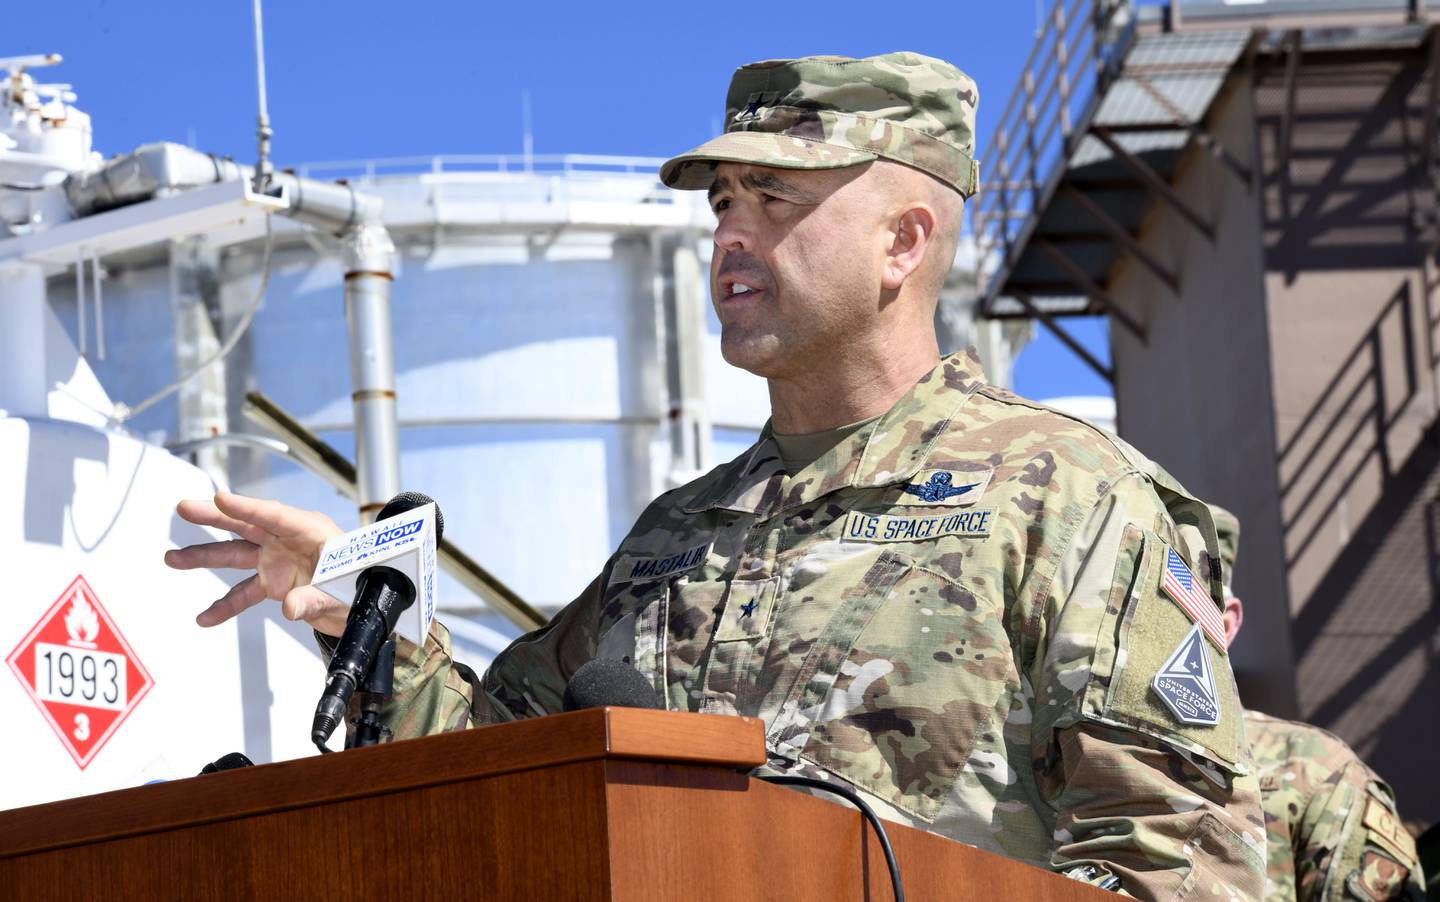 Brig. Gen. Anthony Mastalir, commander of the U.S. Space Forces Indo-Pacific, addresses the media at Haleakala High Altitude Observatory, Hawaii on Monday, Feb. 6, 2023, near the site where hundreds of gallons of diesel fuel spilled last week.